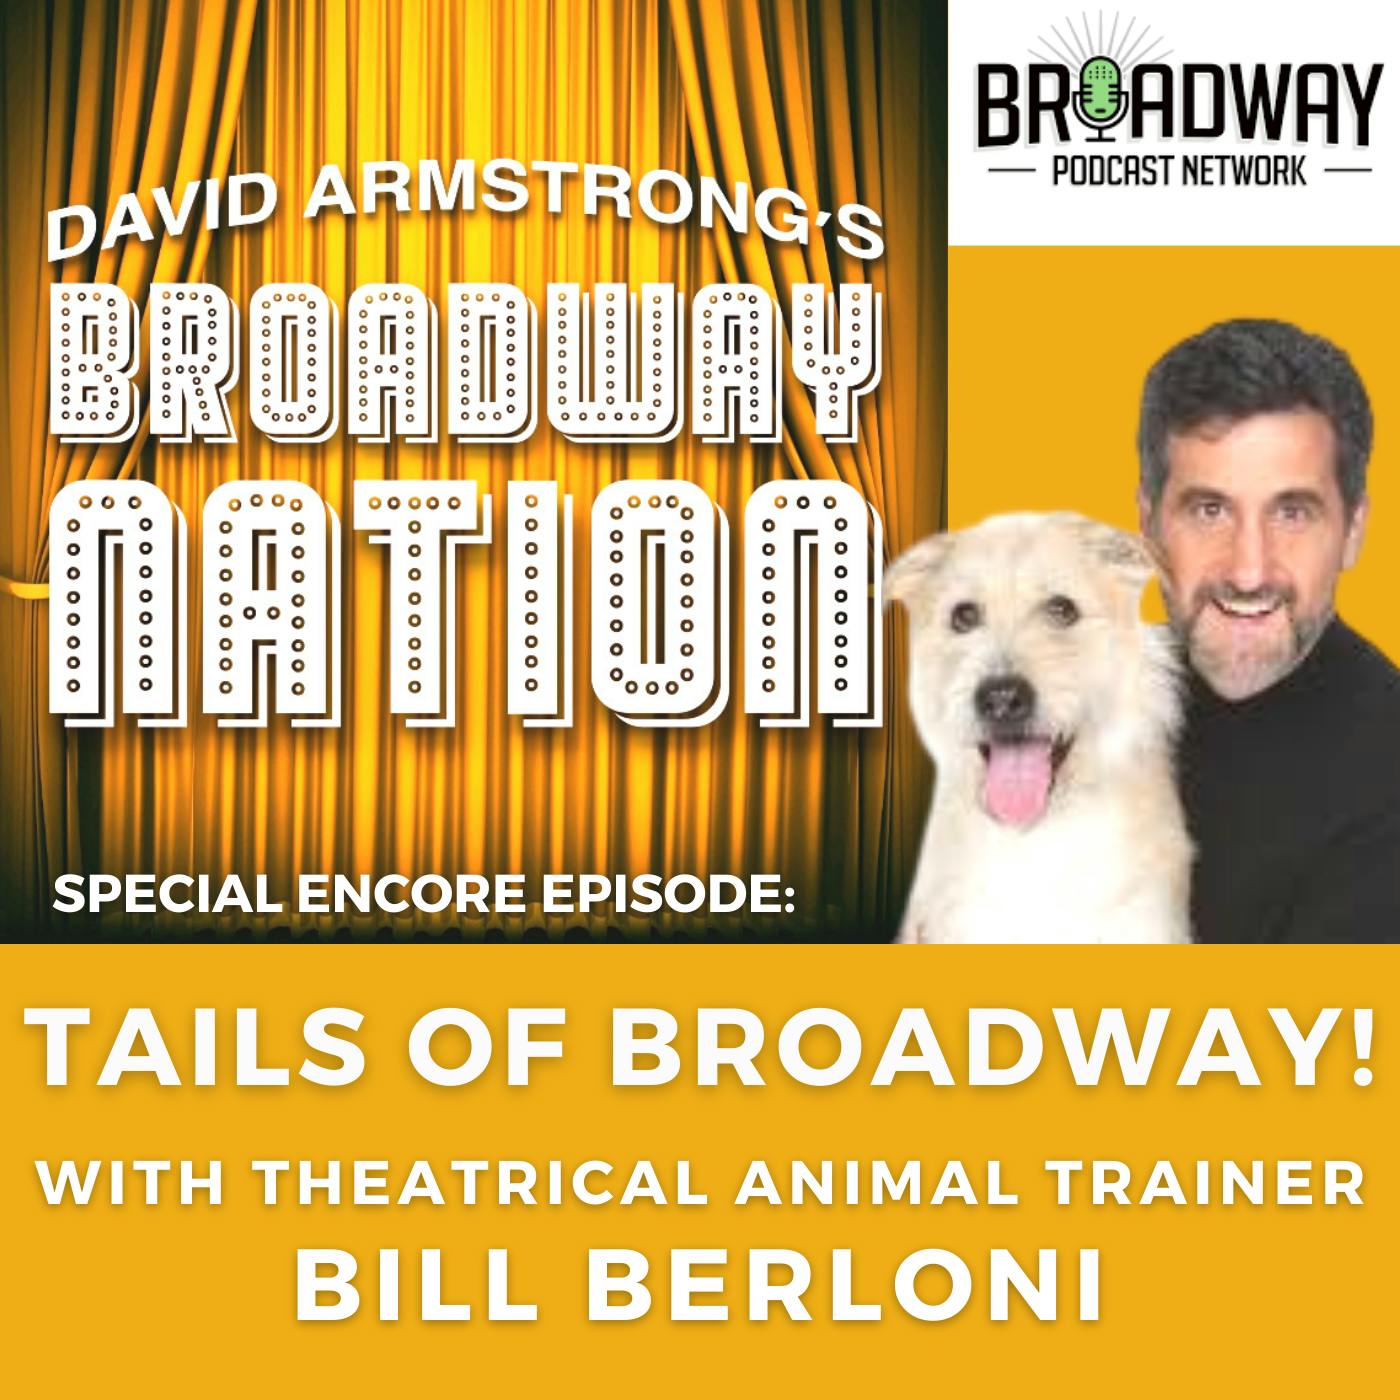 Special Encore Episode: Tails Of Broadway - with theatrical animal trainer Bill Berloni